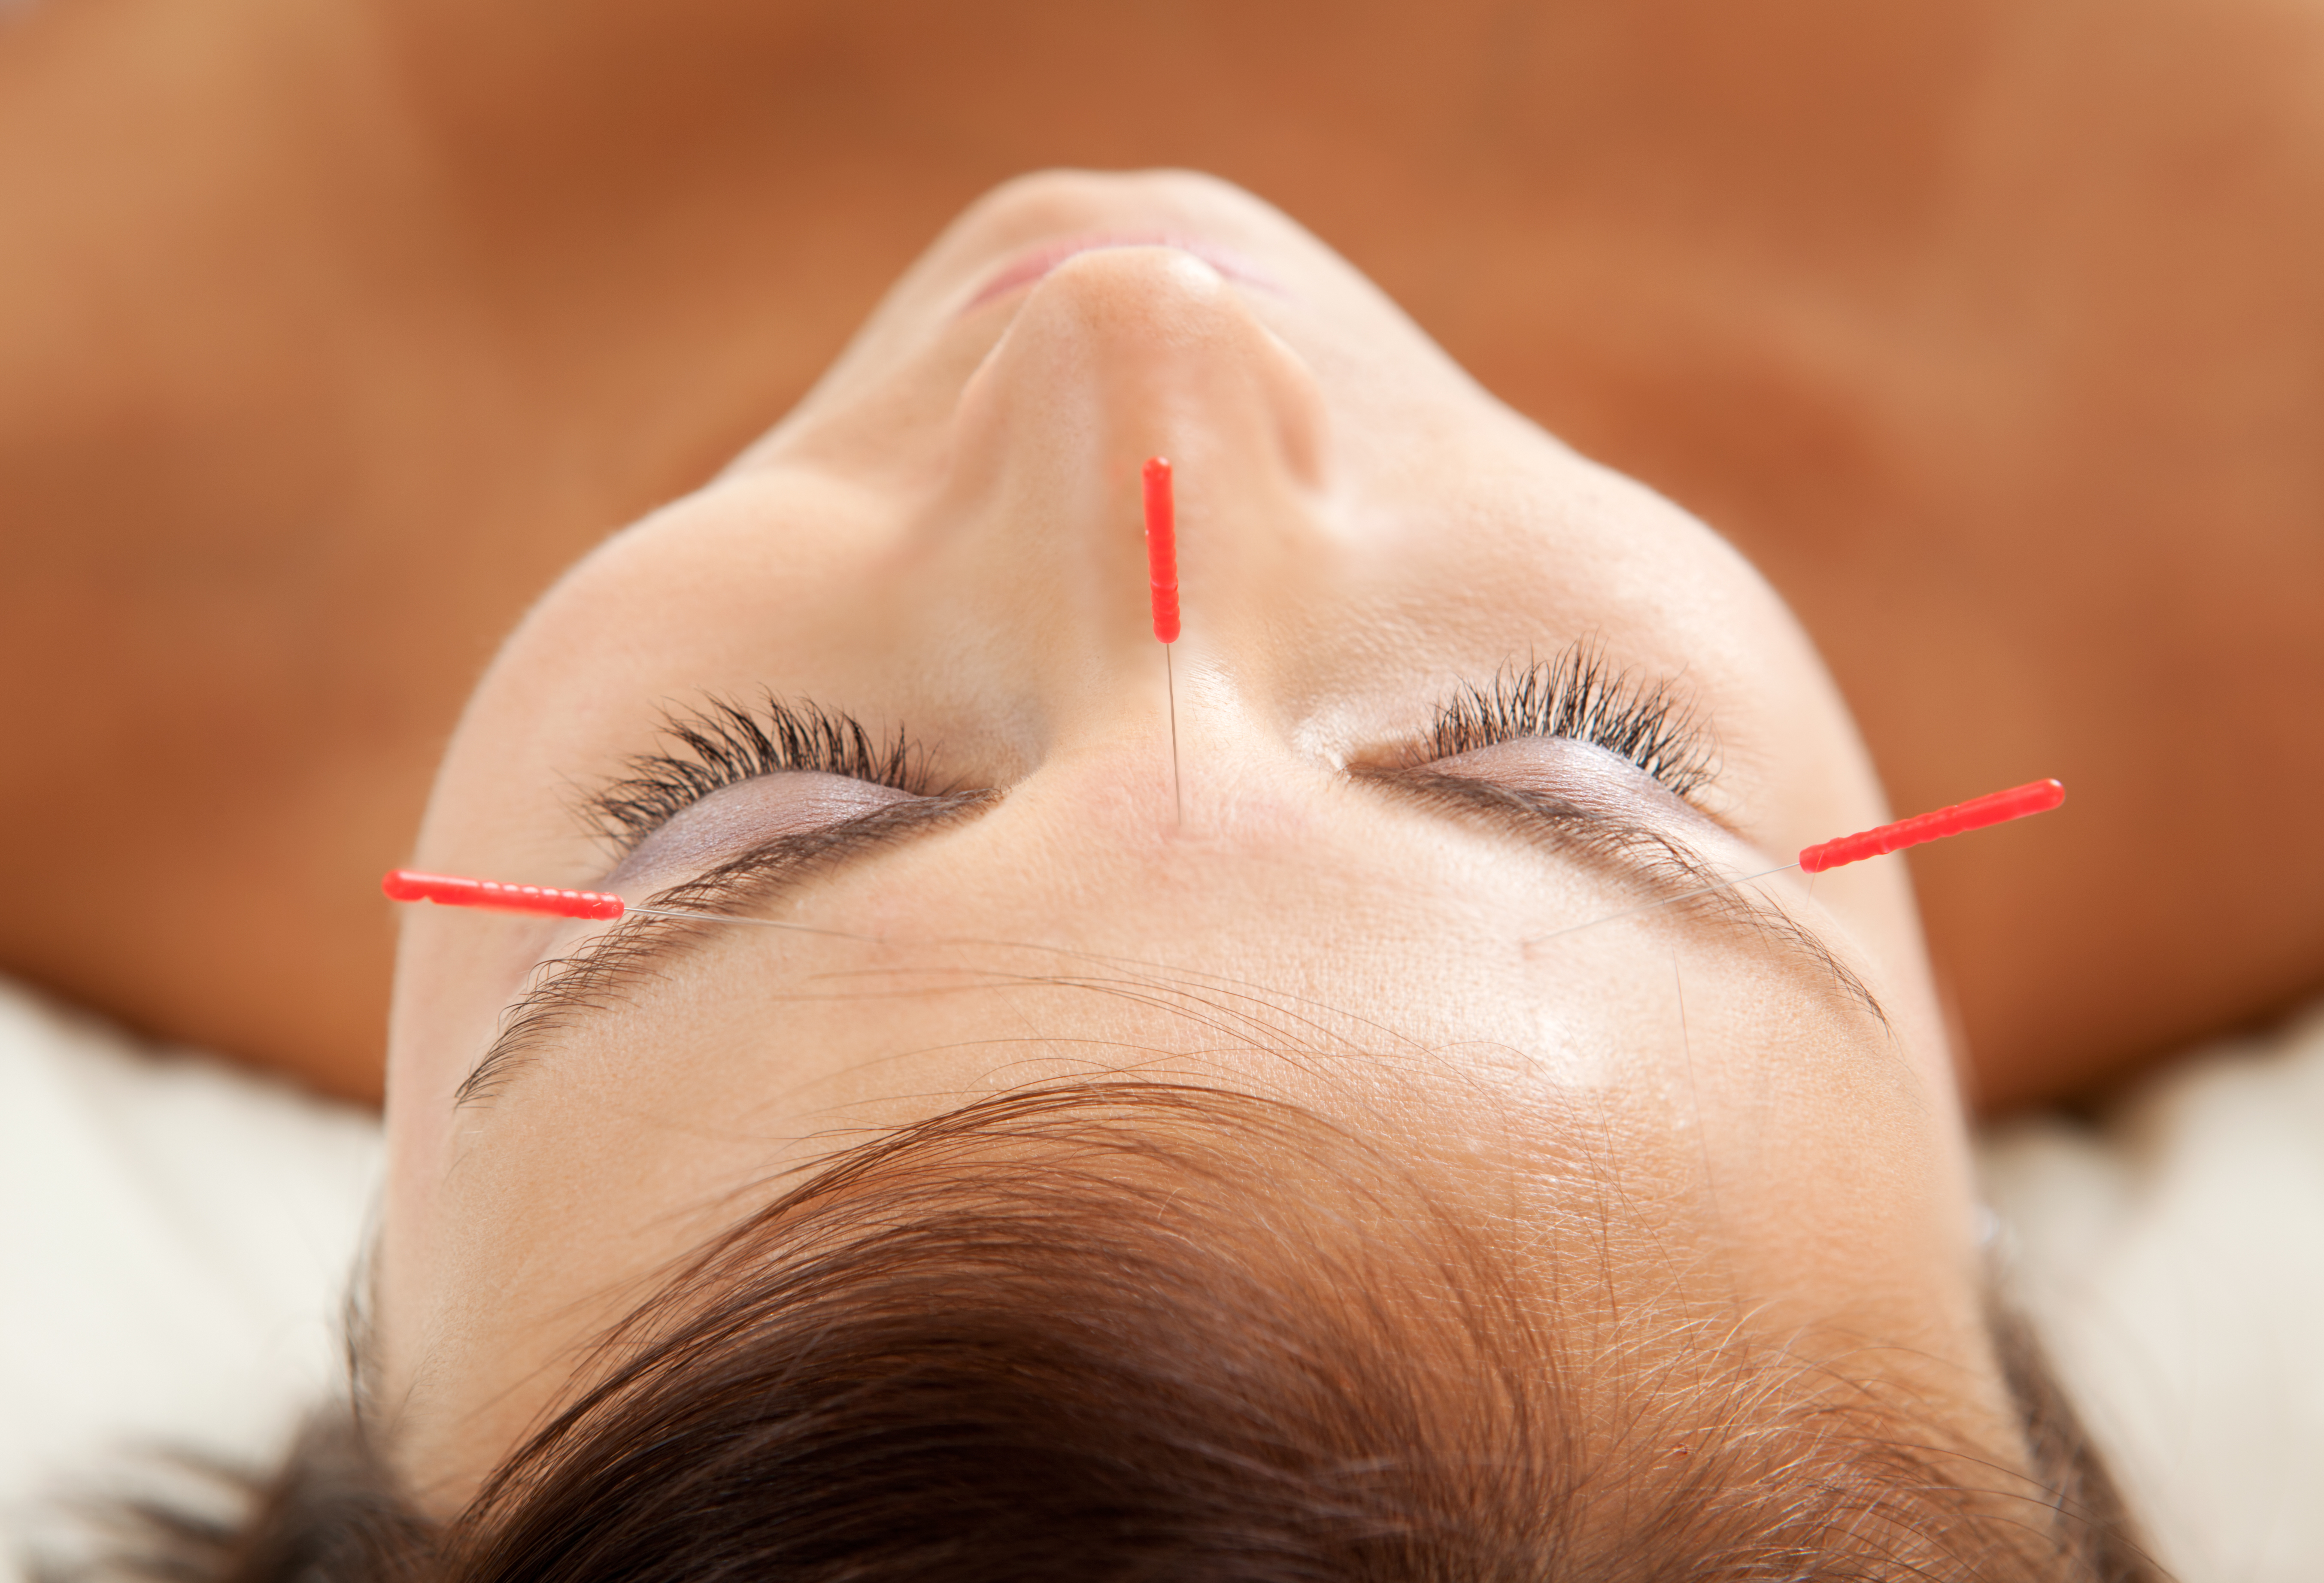 Acupuncture for headaches and migraines